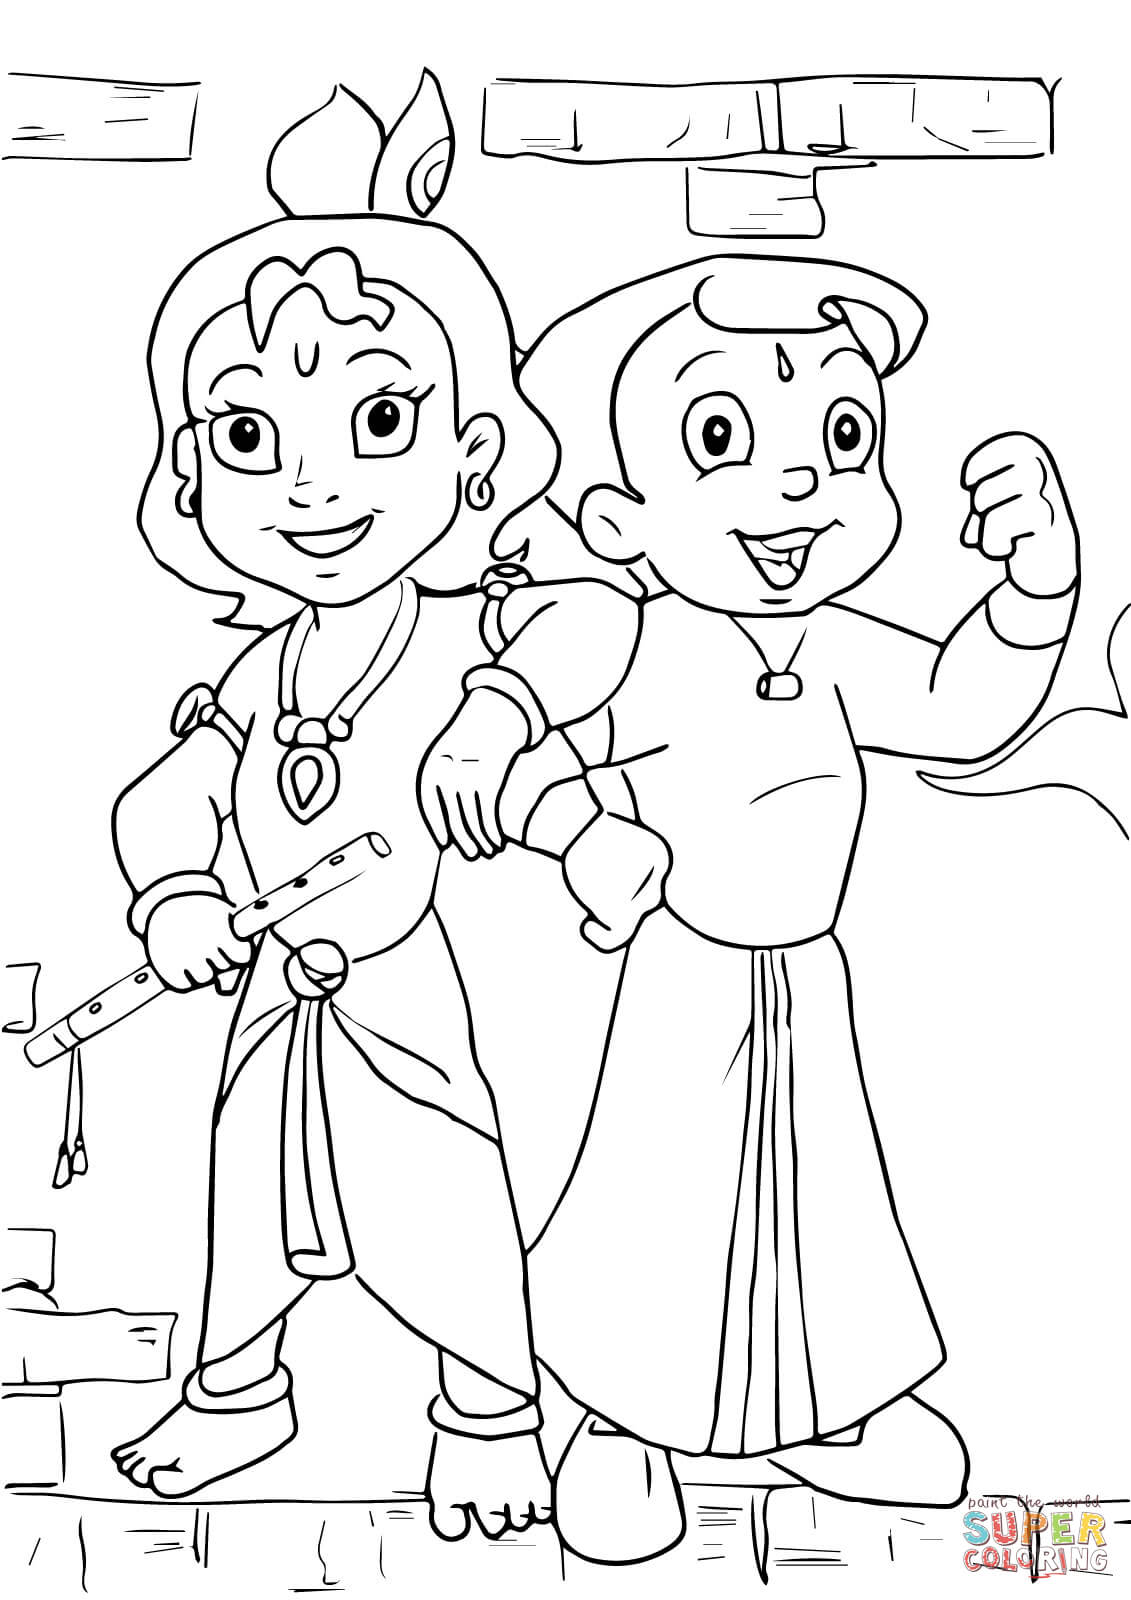 Chhota Bheem and Krishna coloring page | Free Printable Coloring Pages